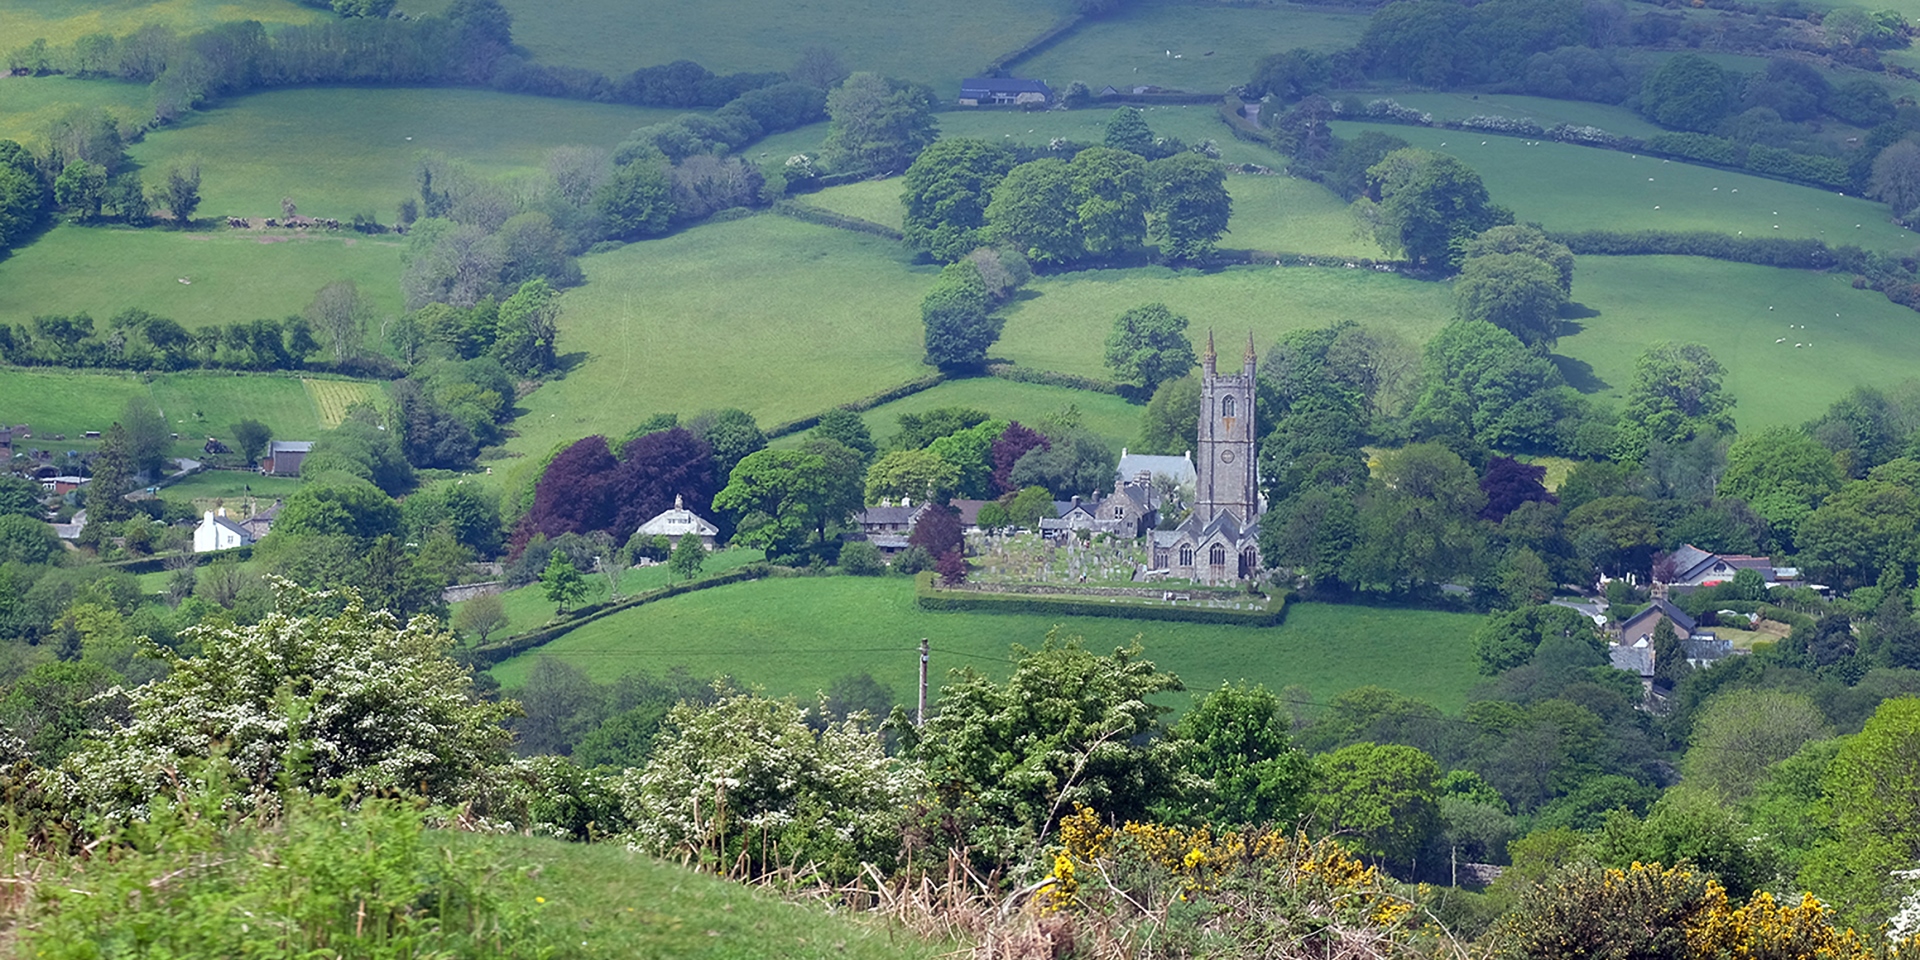 Looking down onto Widecombe